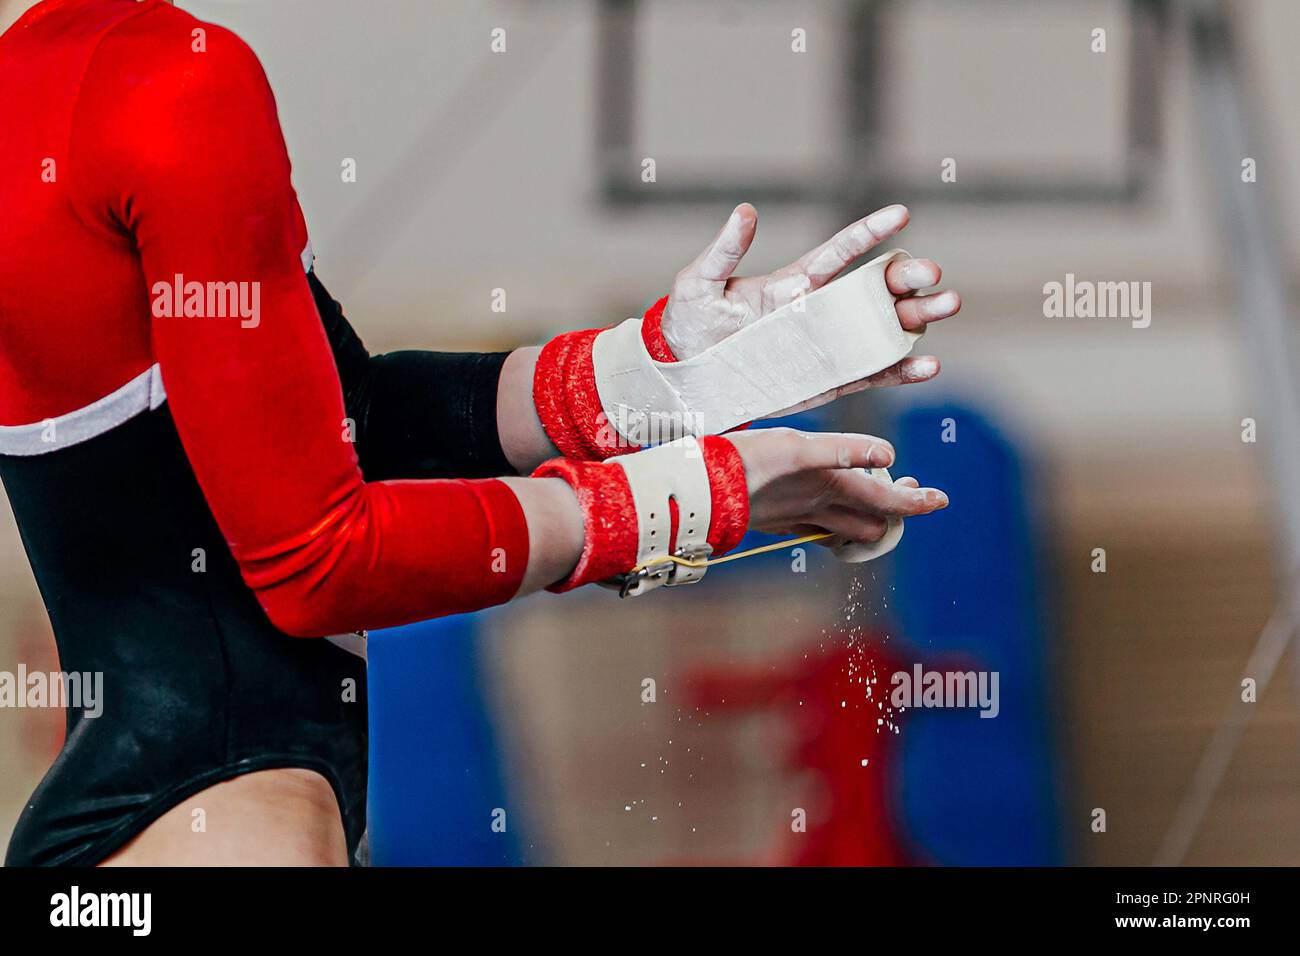 close-up hands female gymnast in gymnastics grips in gym chalk, uneven bars performing Stock Photo